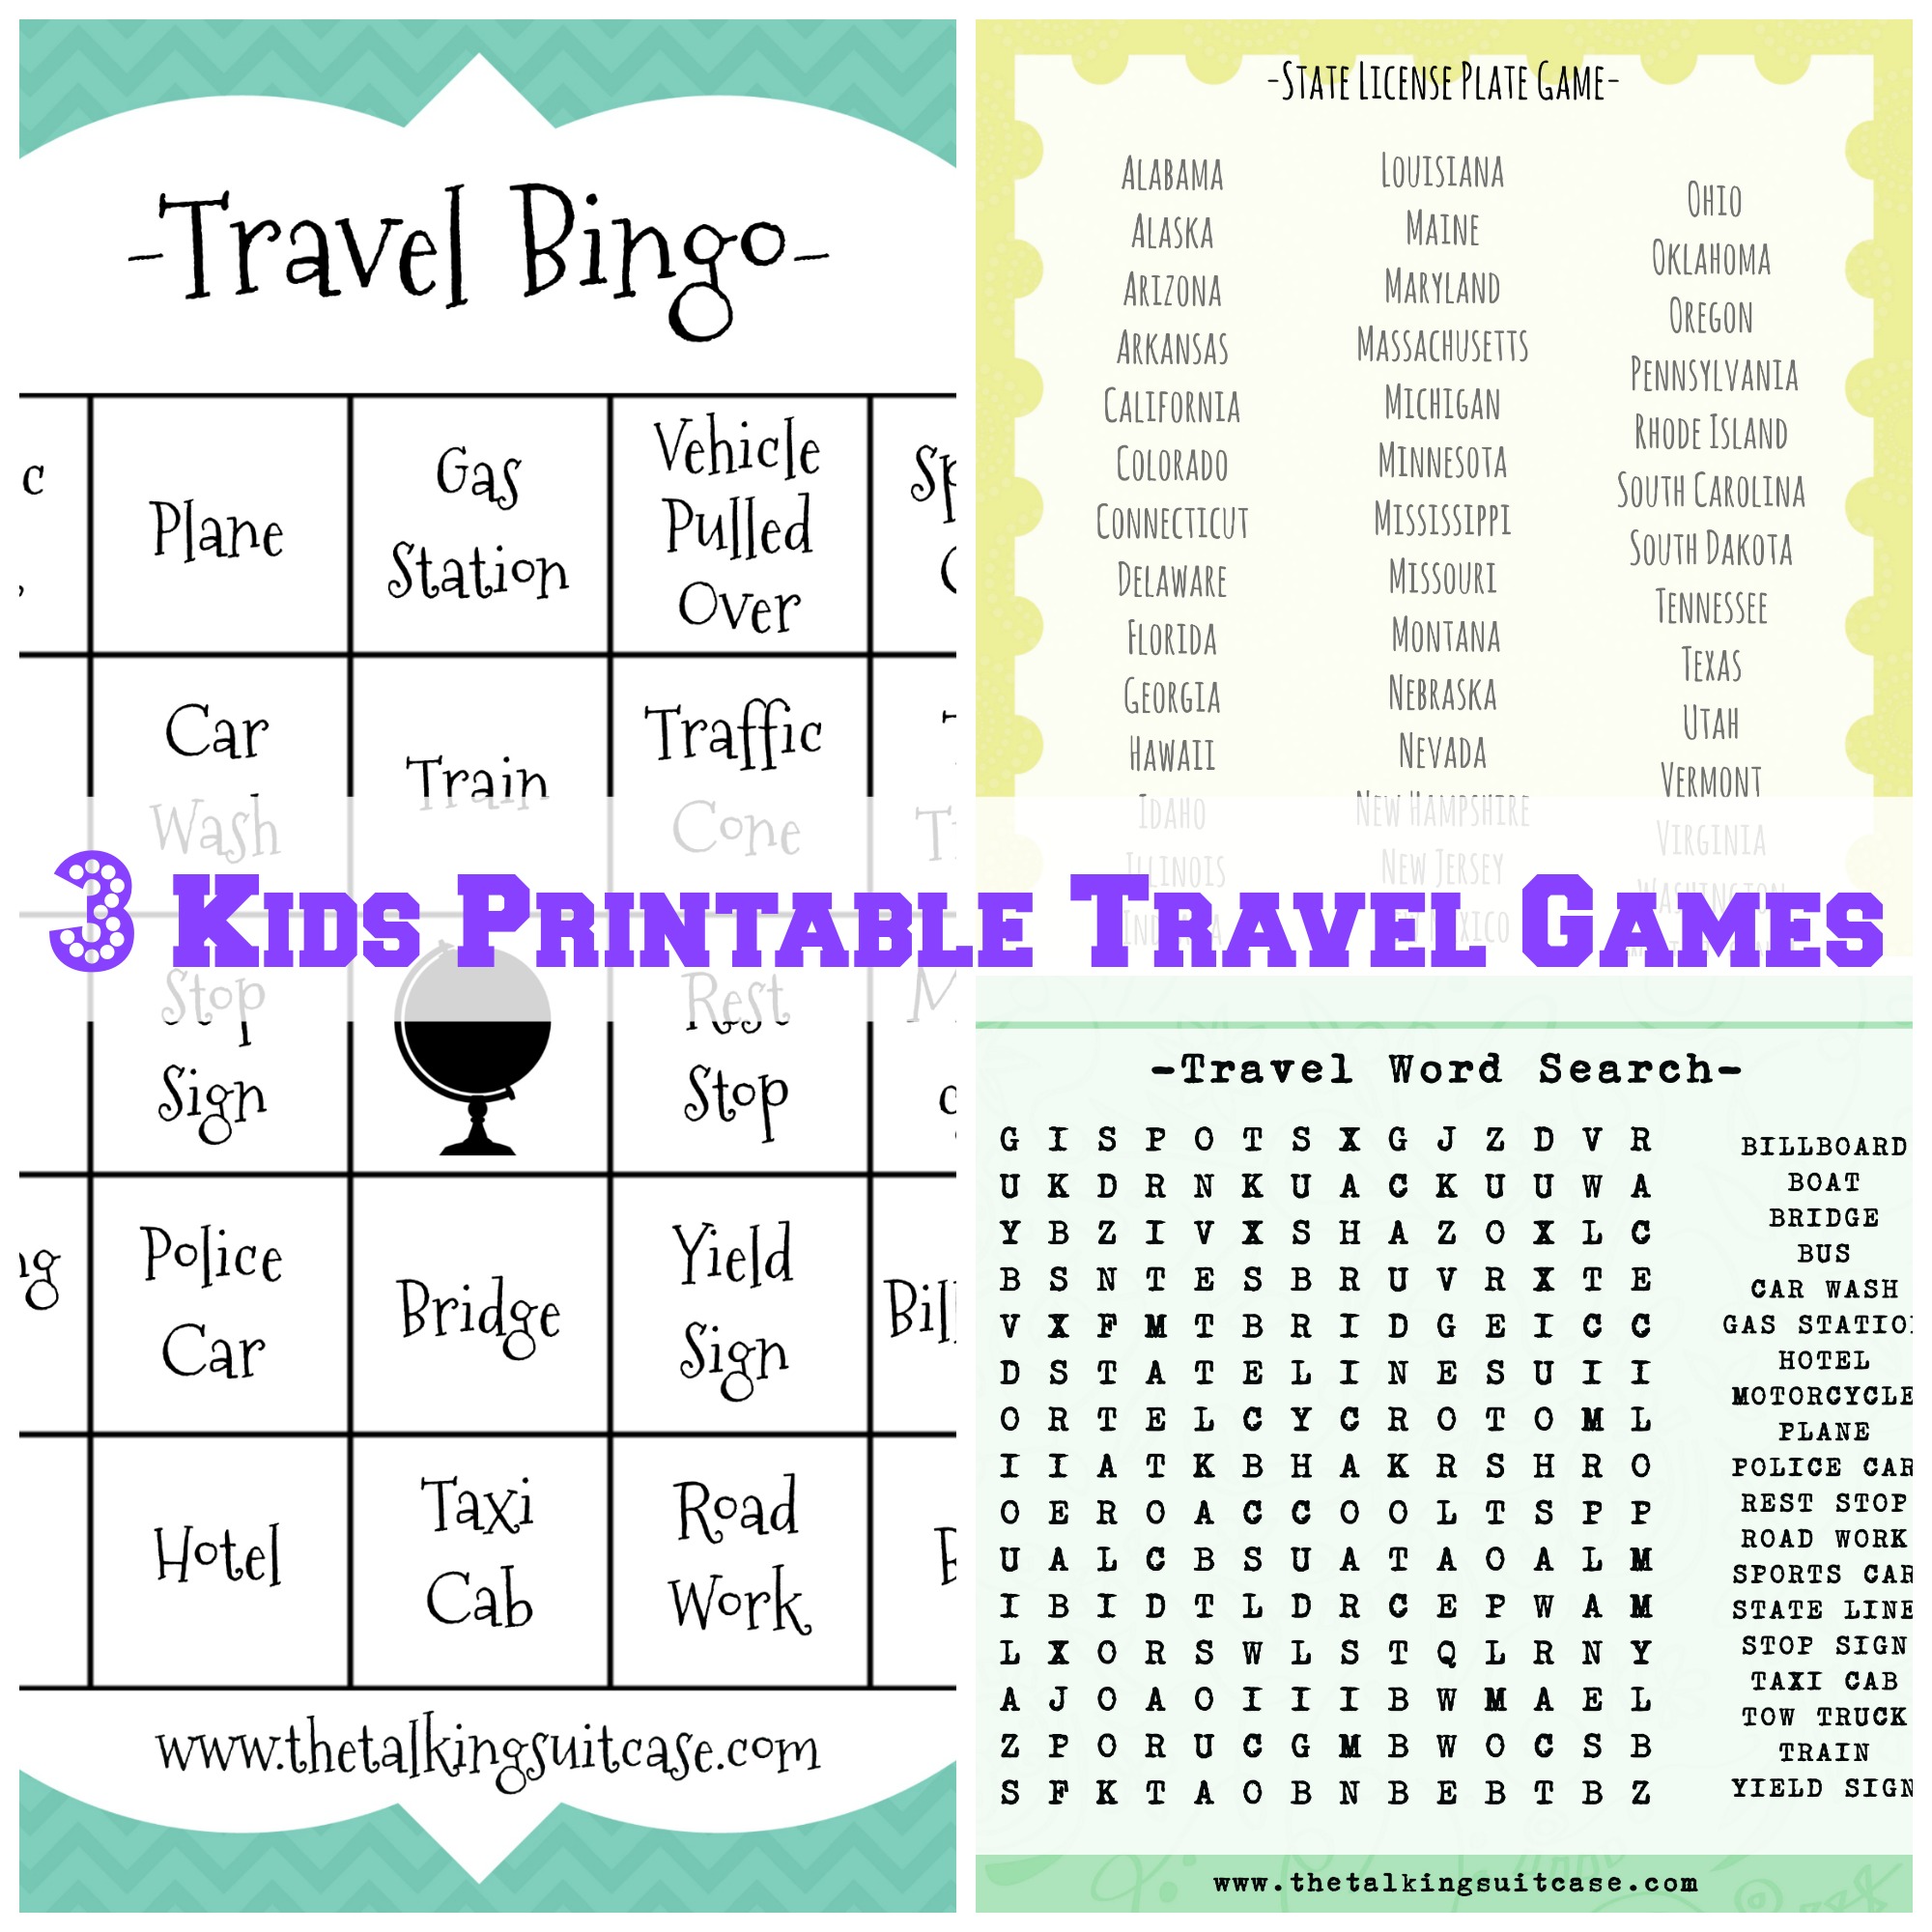 There are many travel games for kids during the trip.